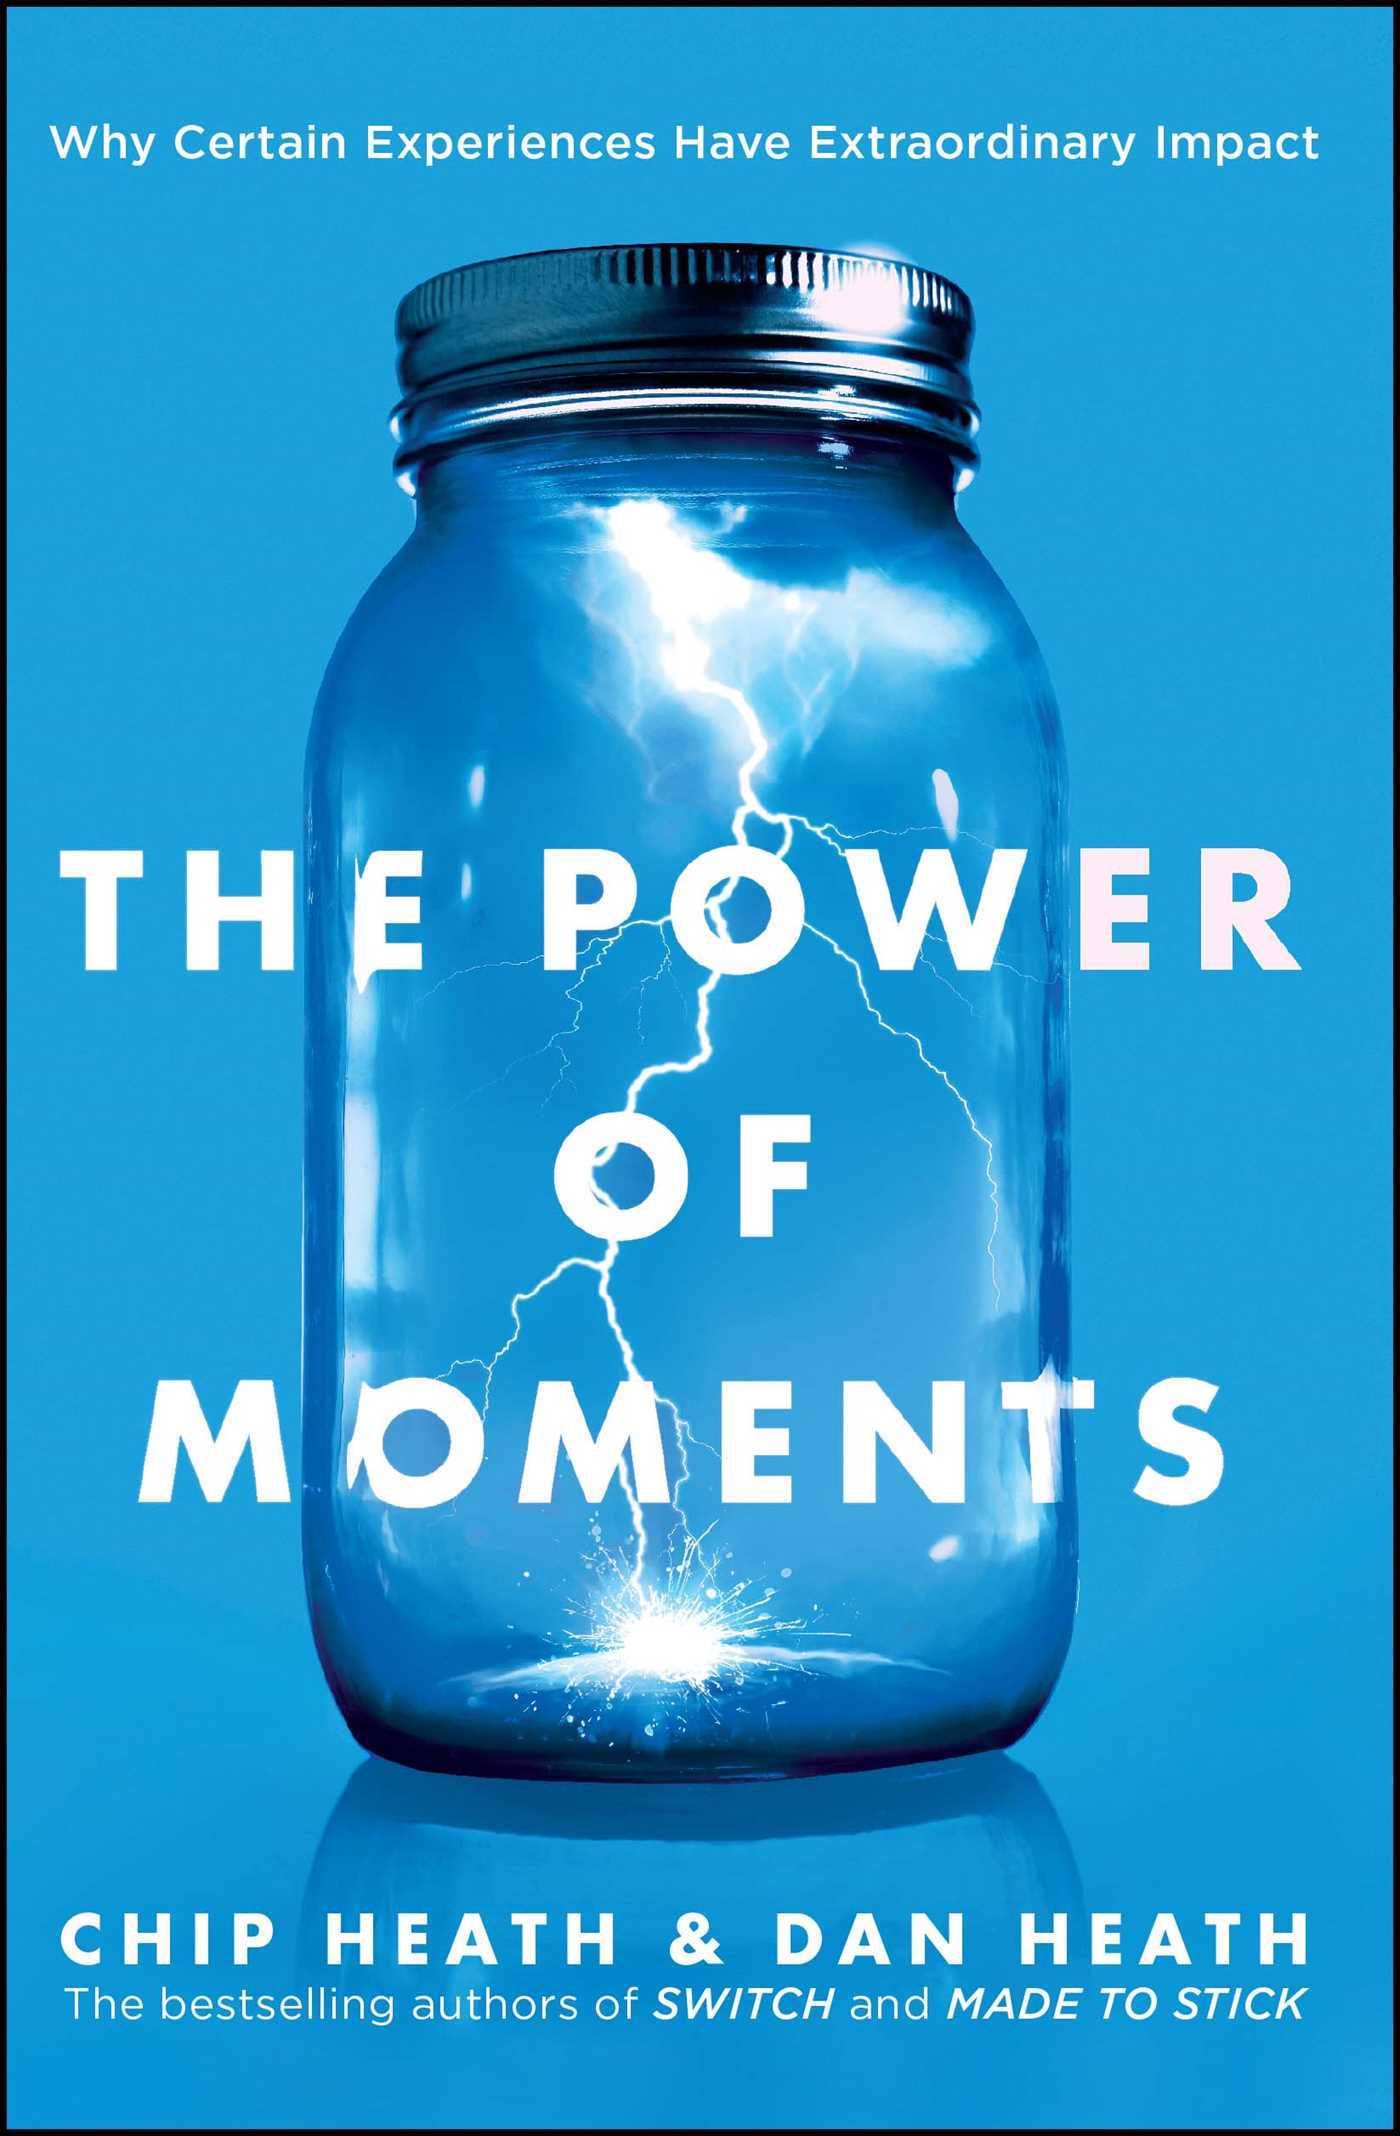 The Power Of Moments - Why Certain Experiences Have Extraordinary Impact